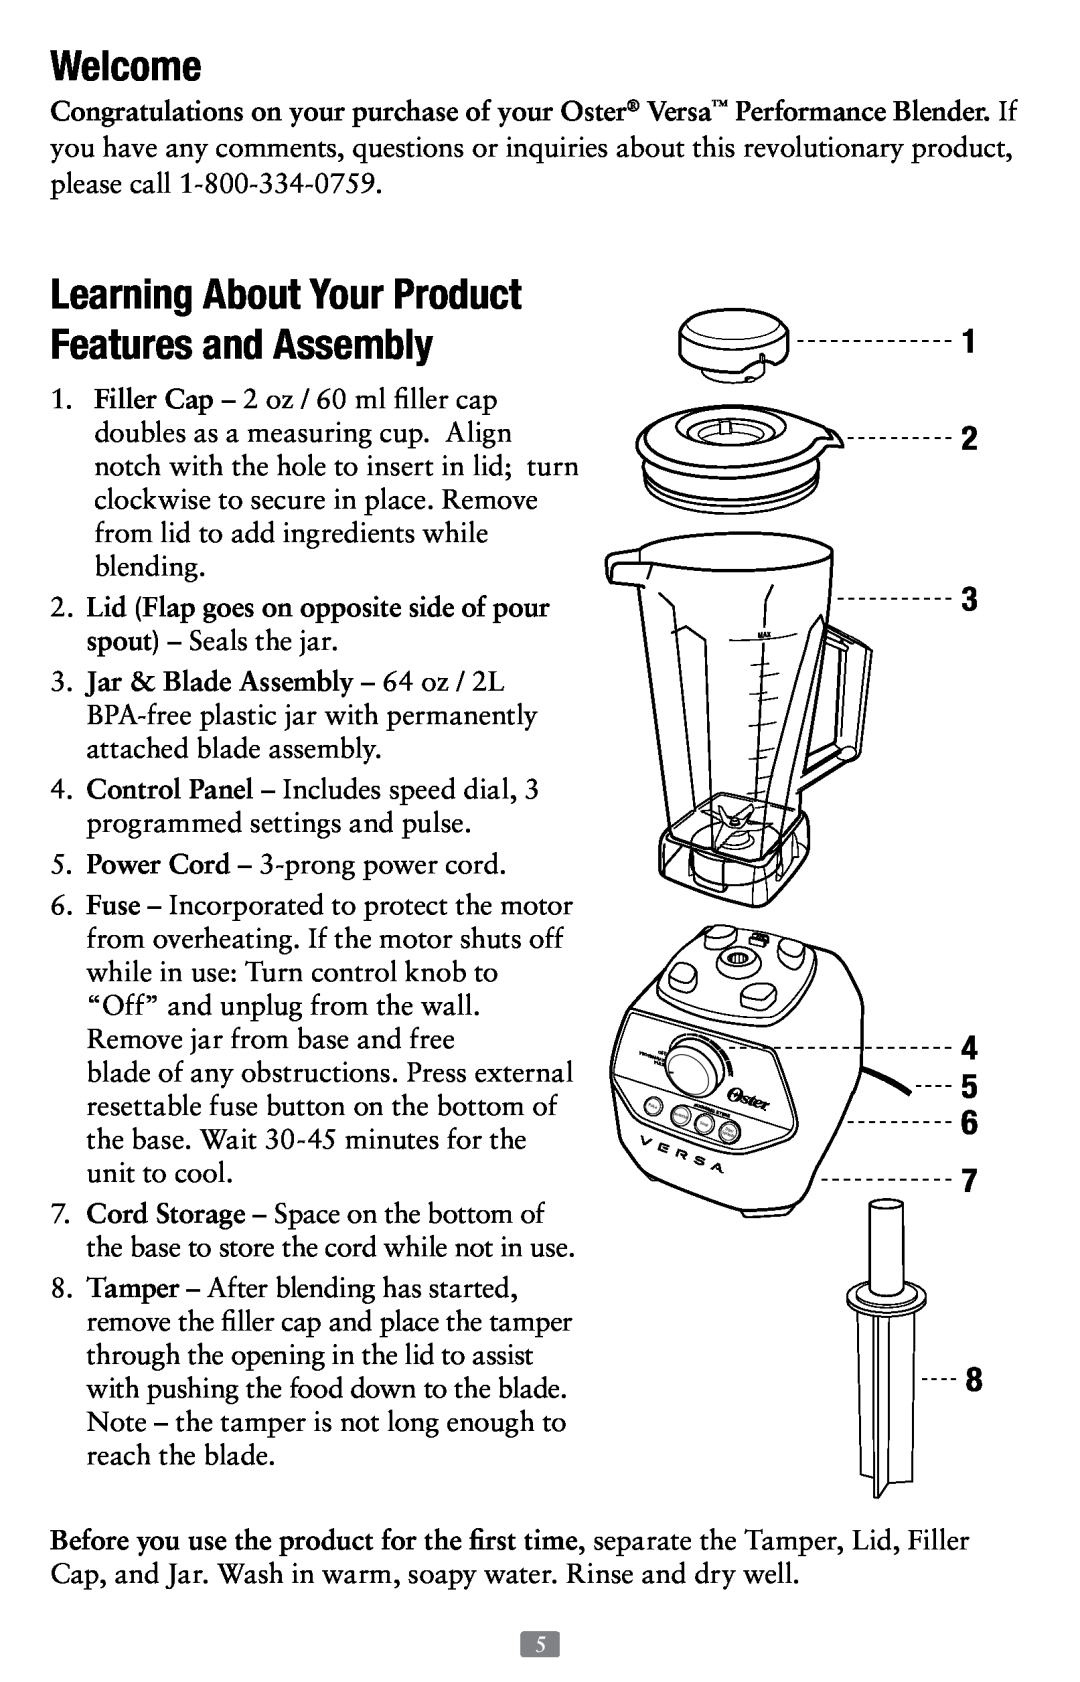 Oster Versa Performance Blender, 155876 user manual Welcome, Learning About Your Product Features and Assembly 